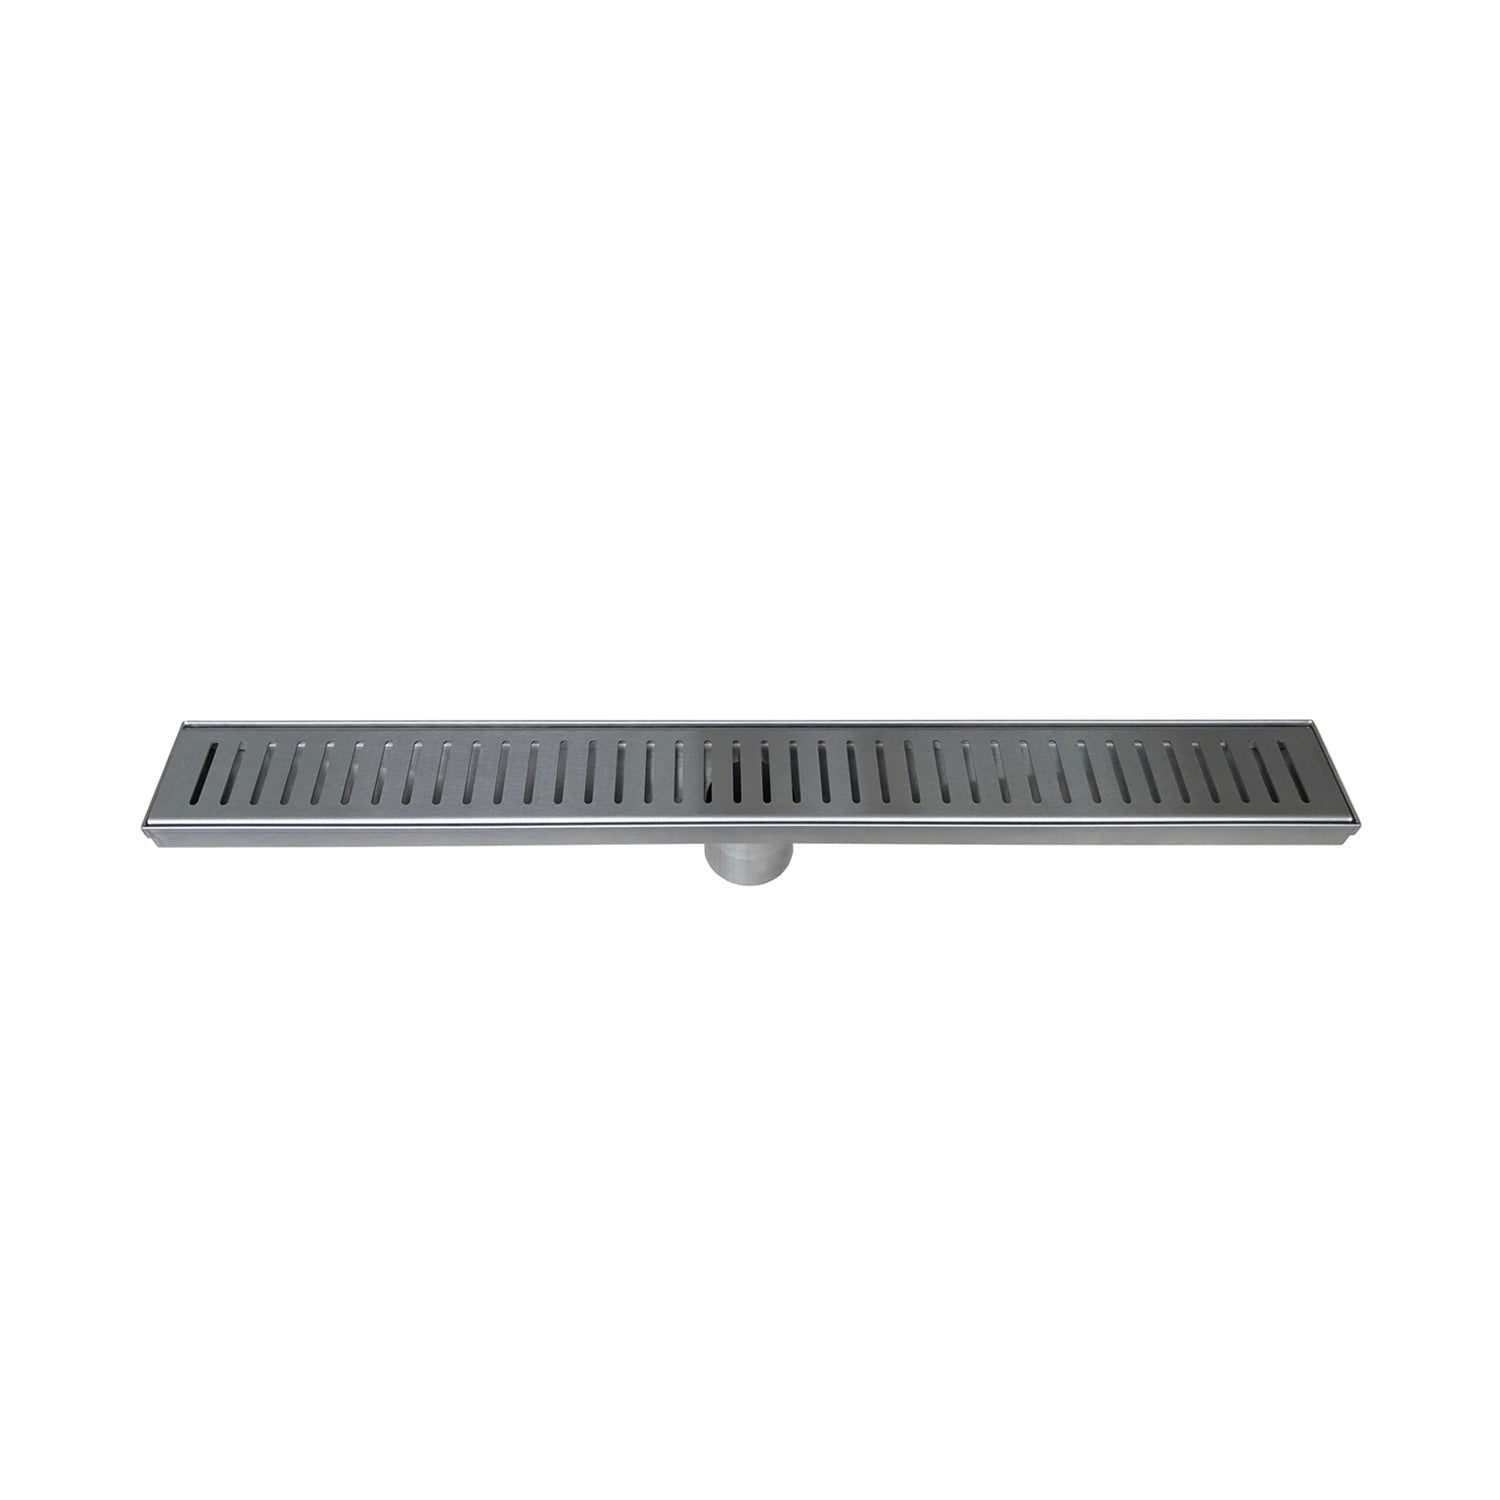 DAX Rectangle Shower Floor Drain, Stainless Steel Body, Stainless Steel Finish, 36 x 3-3/8 Inches (DR36-G06)